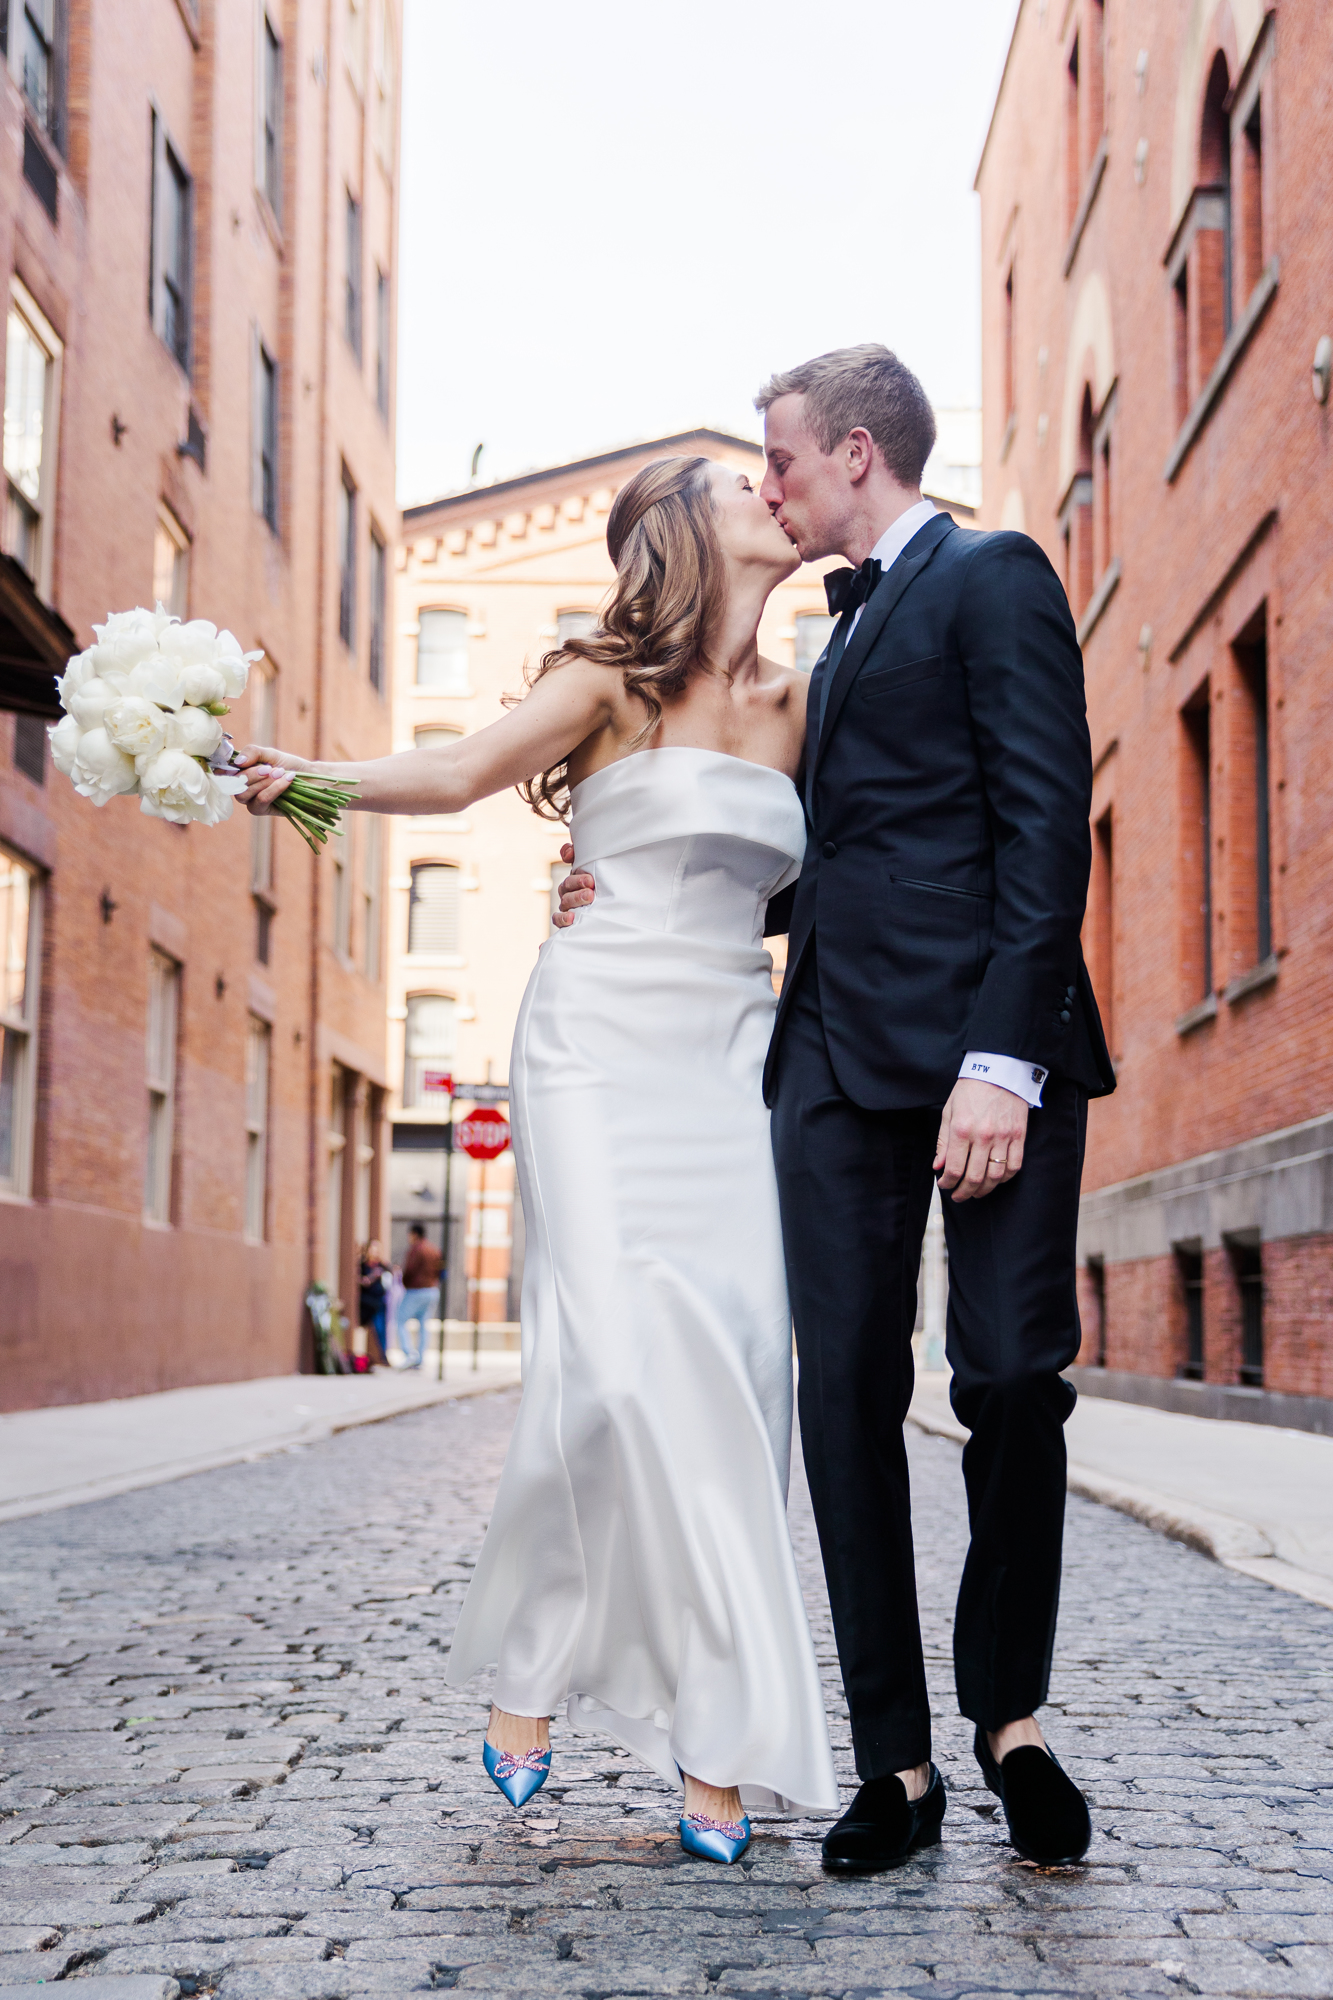 Timeless NYC Elopement Photography